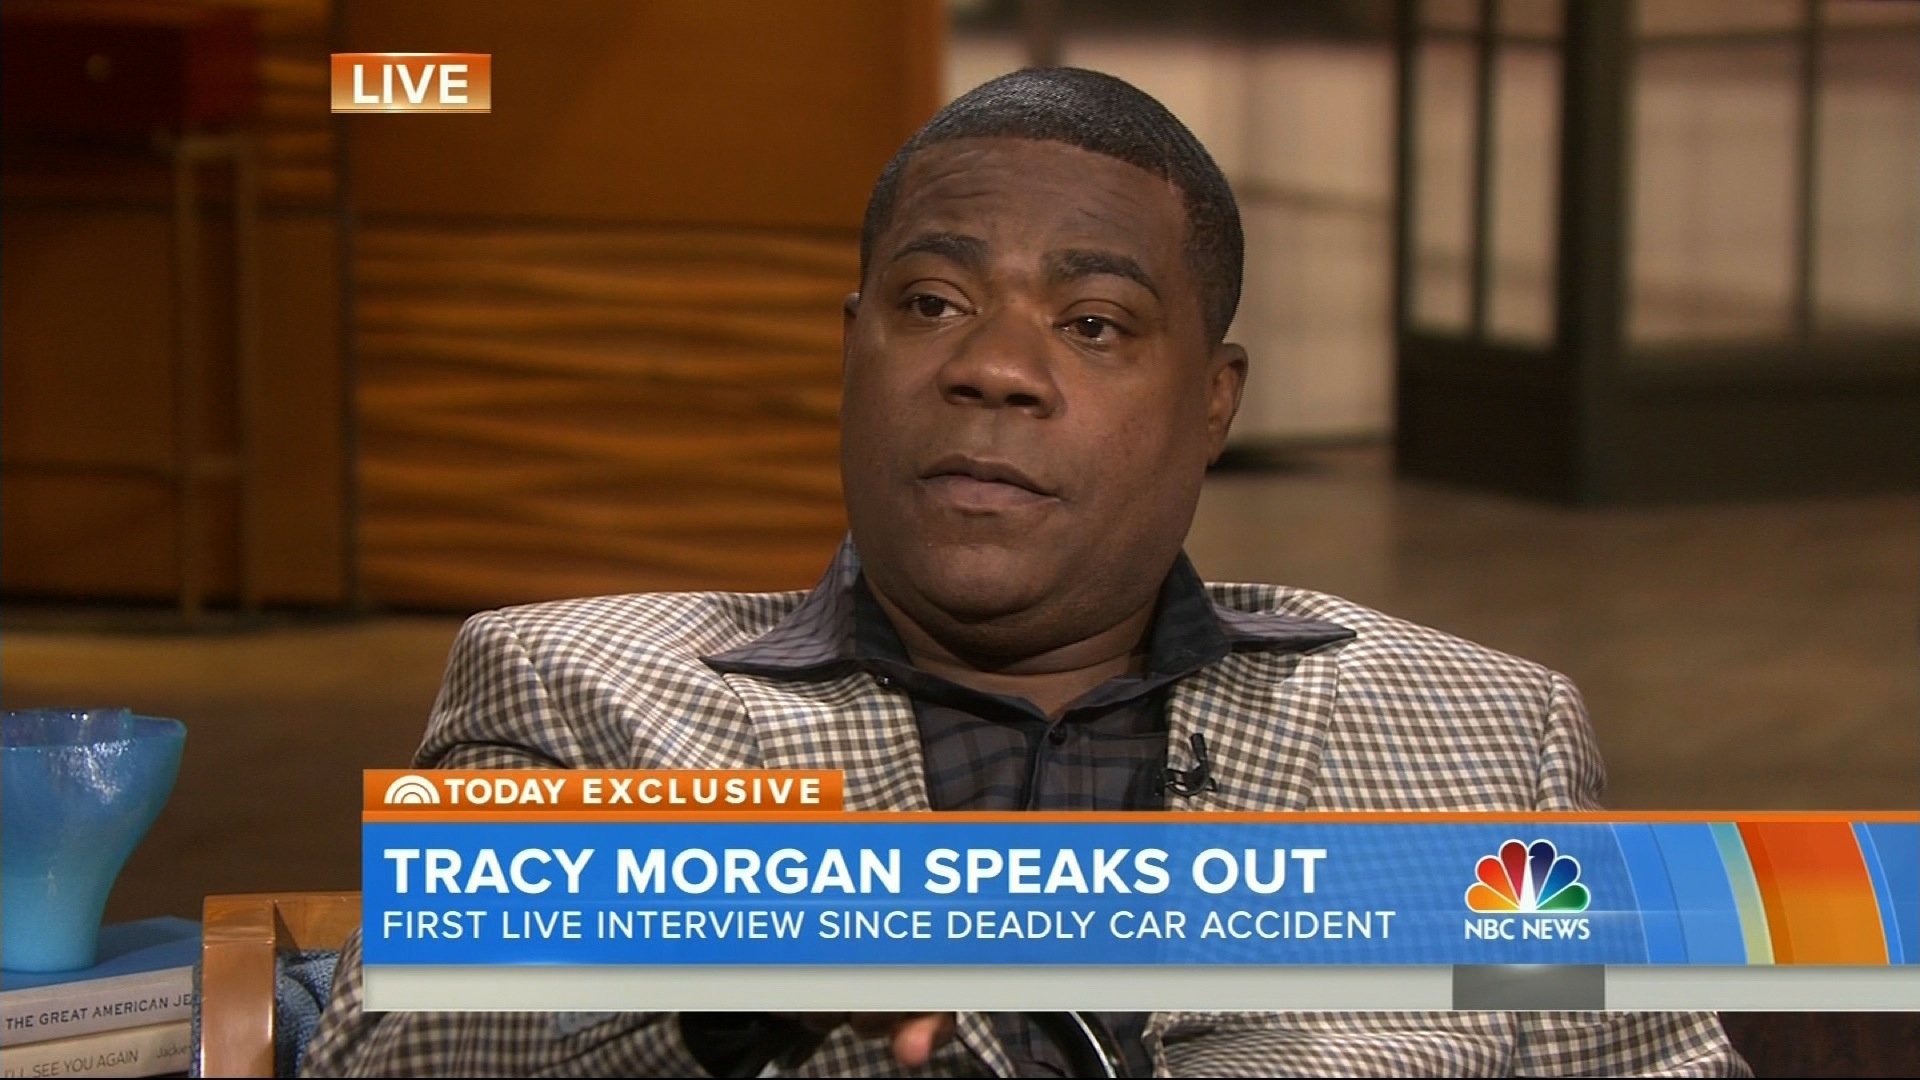 Tracy Morgan thanked Walmart, the company's whose truck hit his car a year ago seriously injuring him and killing a friend, saying that the company "stepped up to the plate in a tremendous way." In an emotional interview on NBC's Today Show Monday, June 1, 2015, in which he broke down in tears several times, Morgan said he was grateful that Walmart had taken full responsibility for the accident and had also settled with the family of his friend who was killed, James McNair.